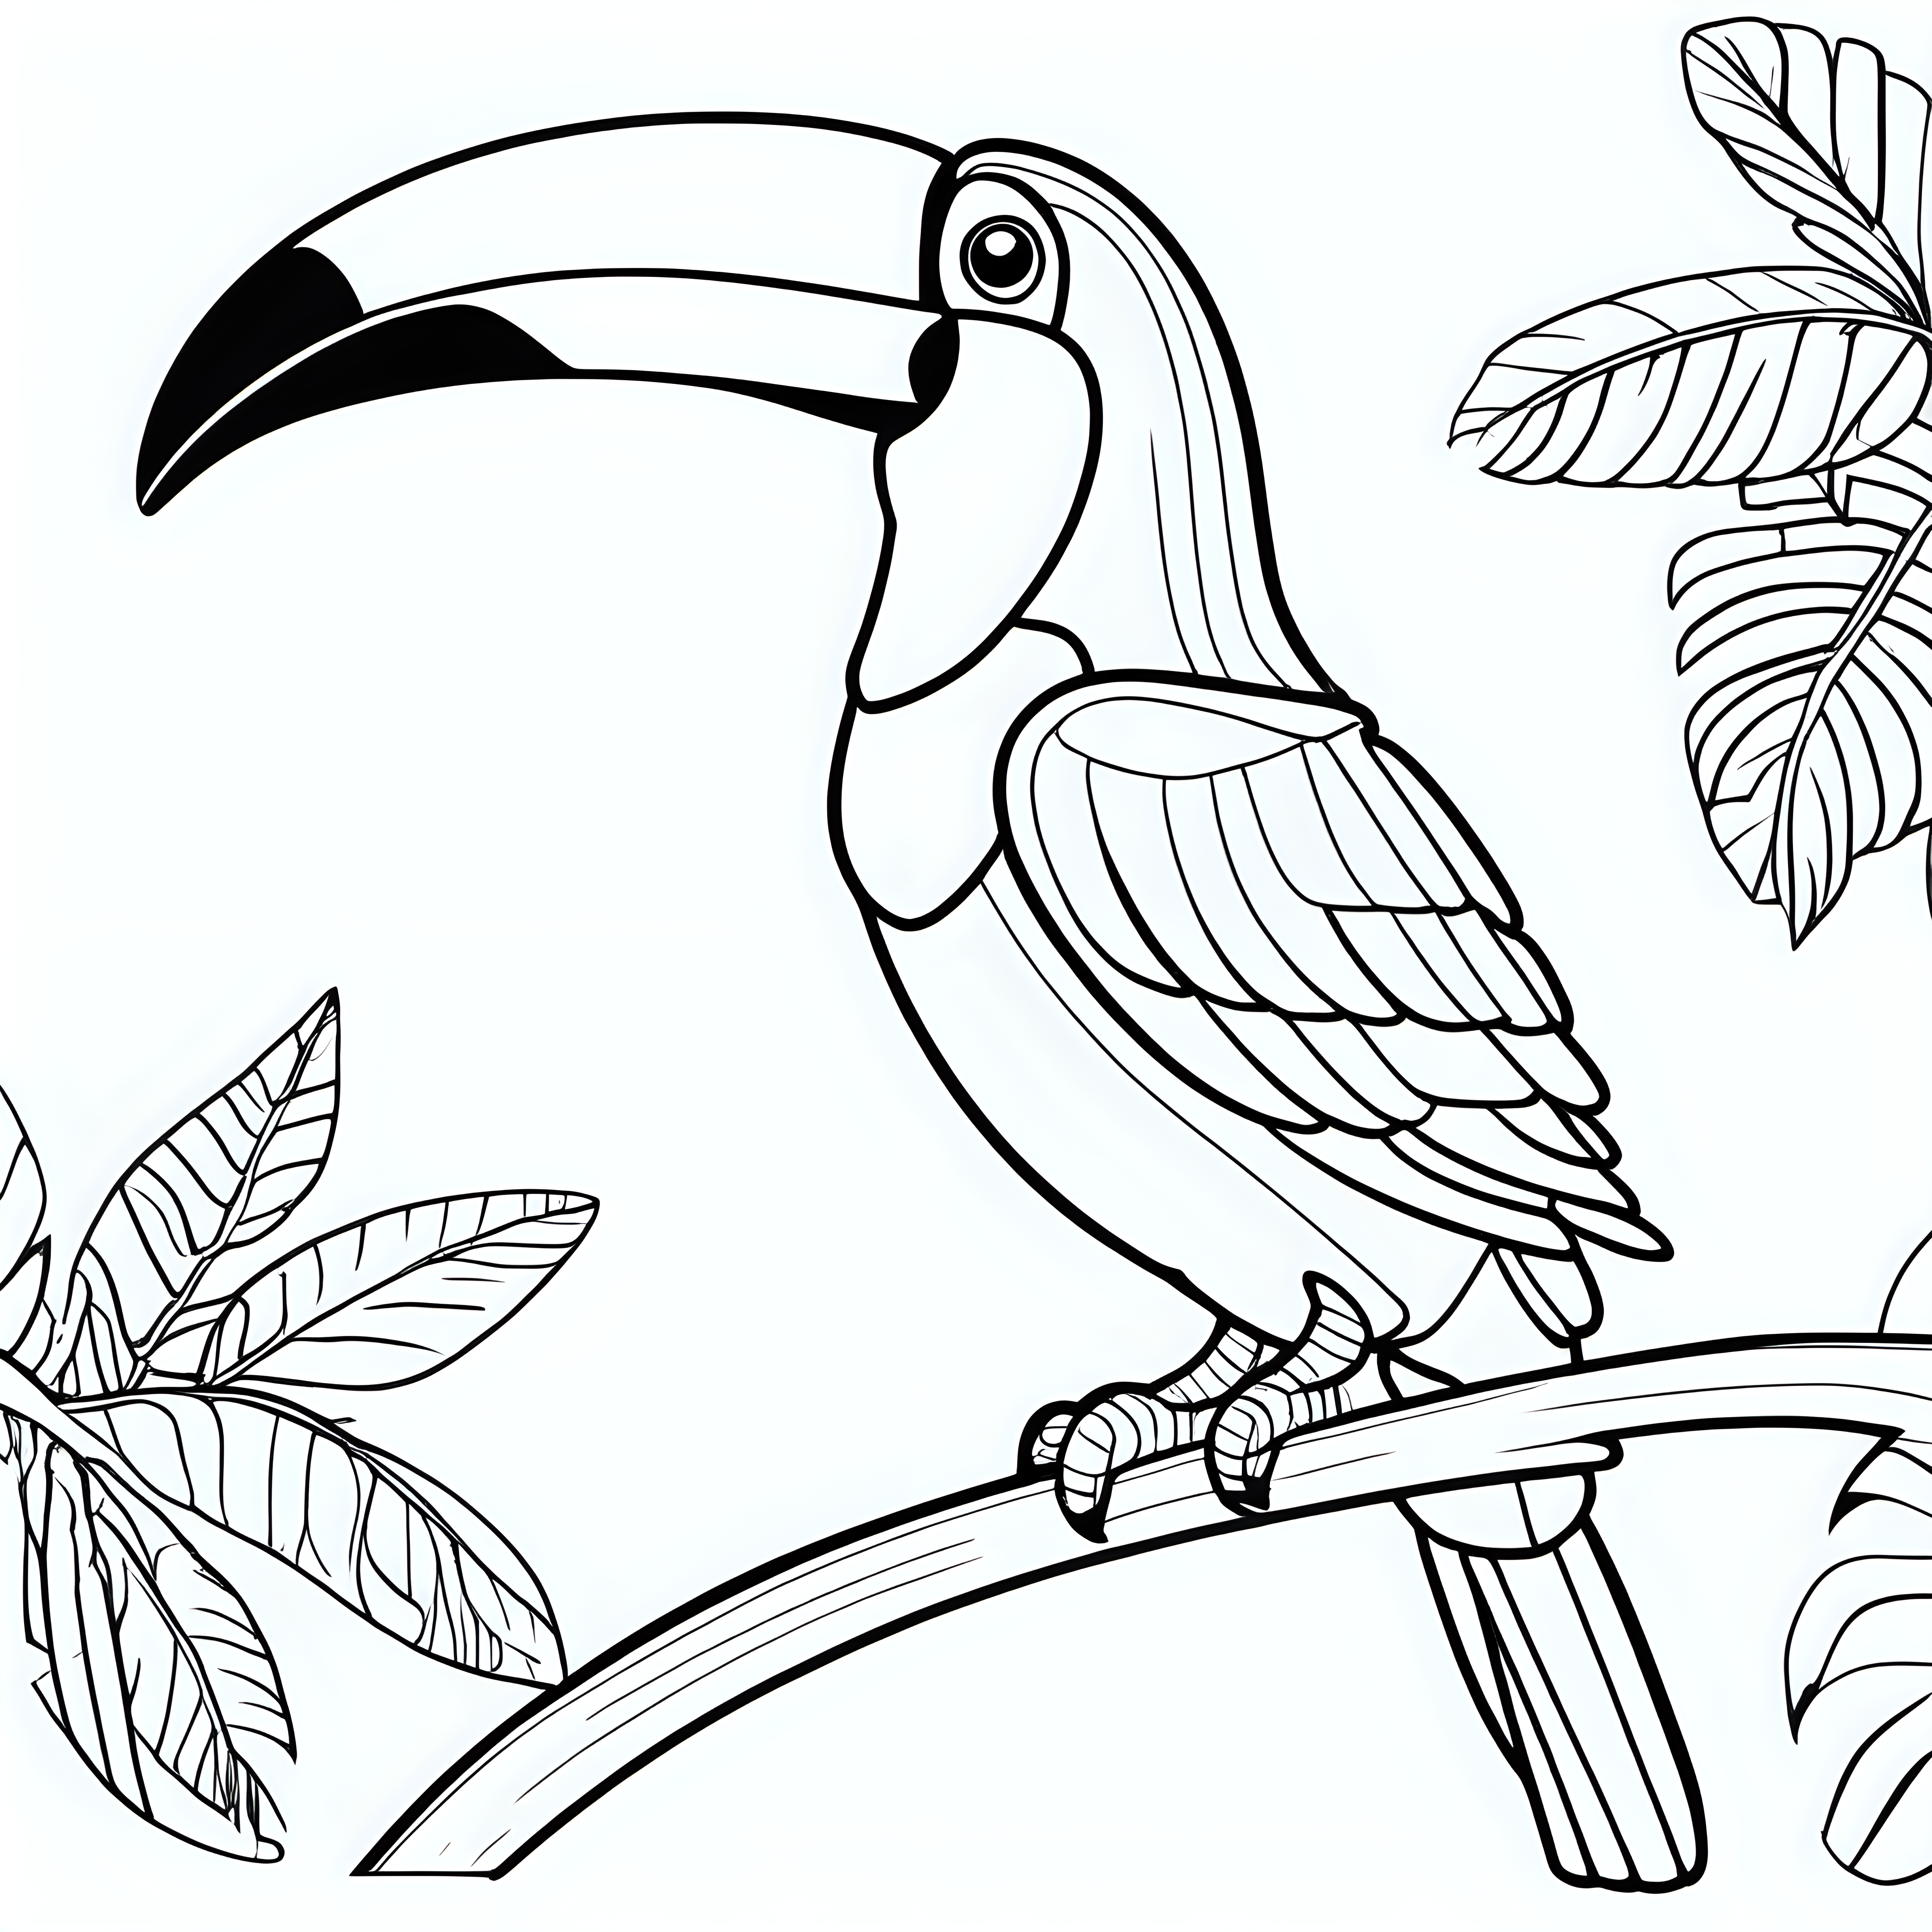 draw a cute Toucans with only the outline